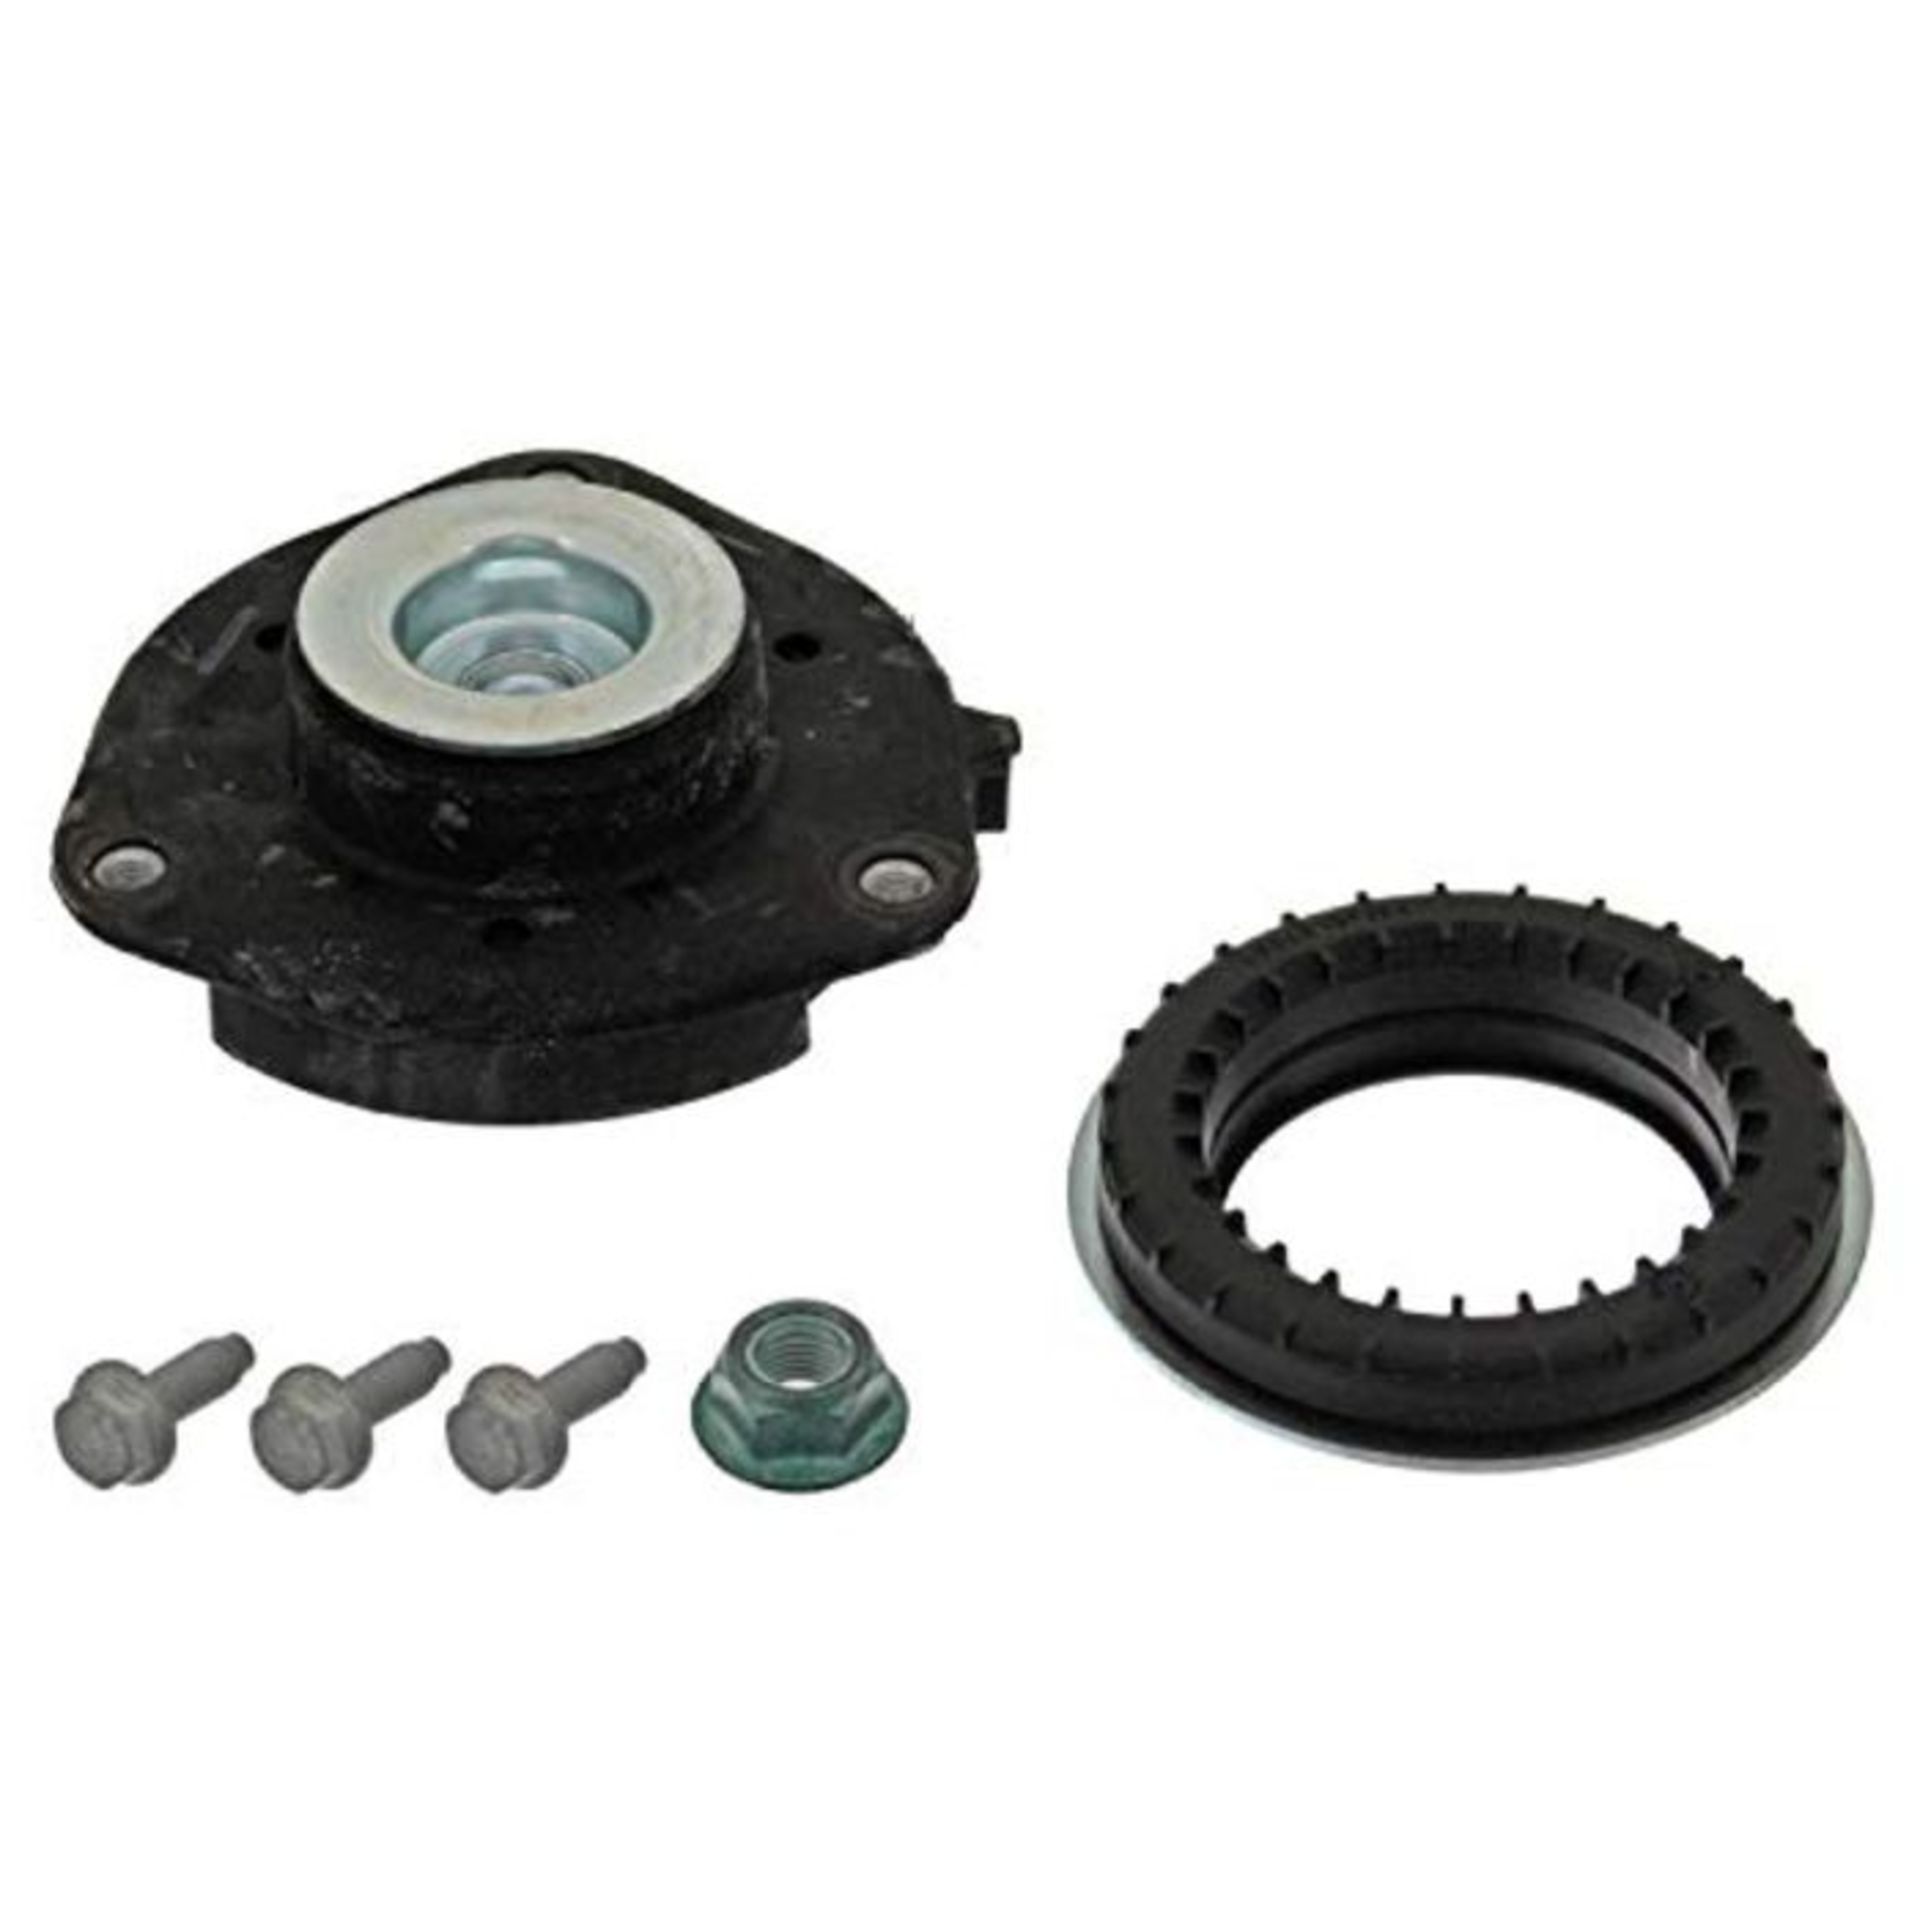 febi bilstein 37897 Strut Top Mounting Kit with ball bearing, screws and nuts, pack of